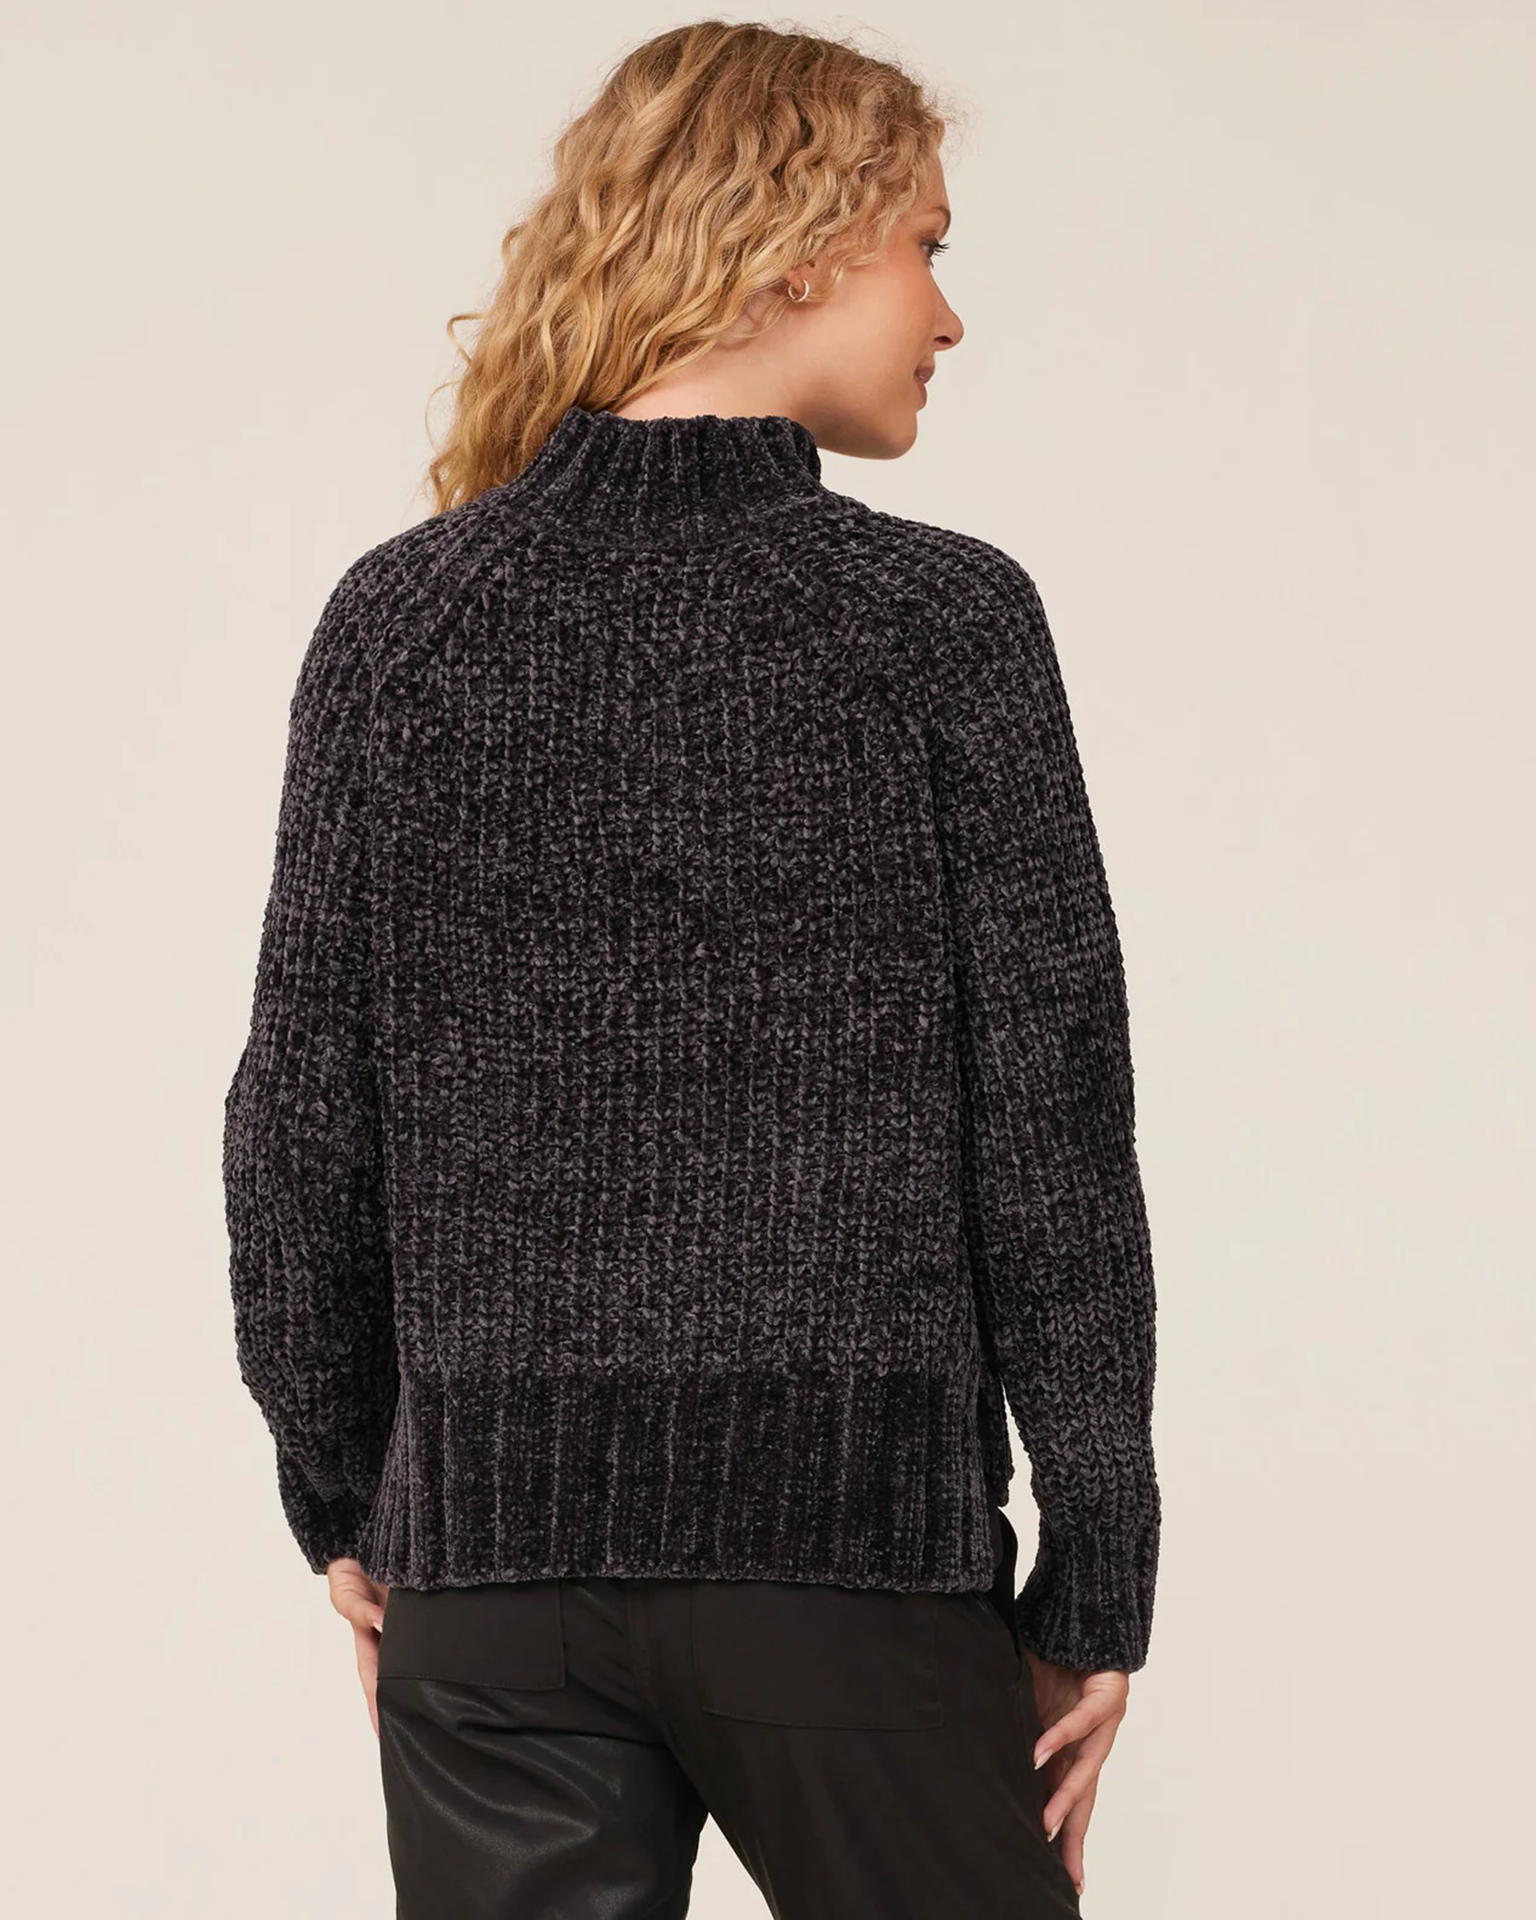 Bella Dahl Turtle Neck Sweater in Shadow Night - Bliss Boutiques